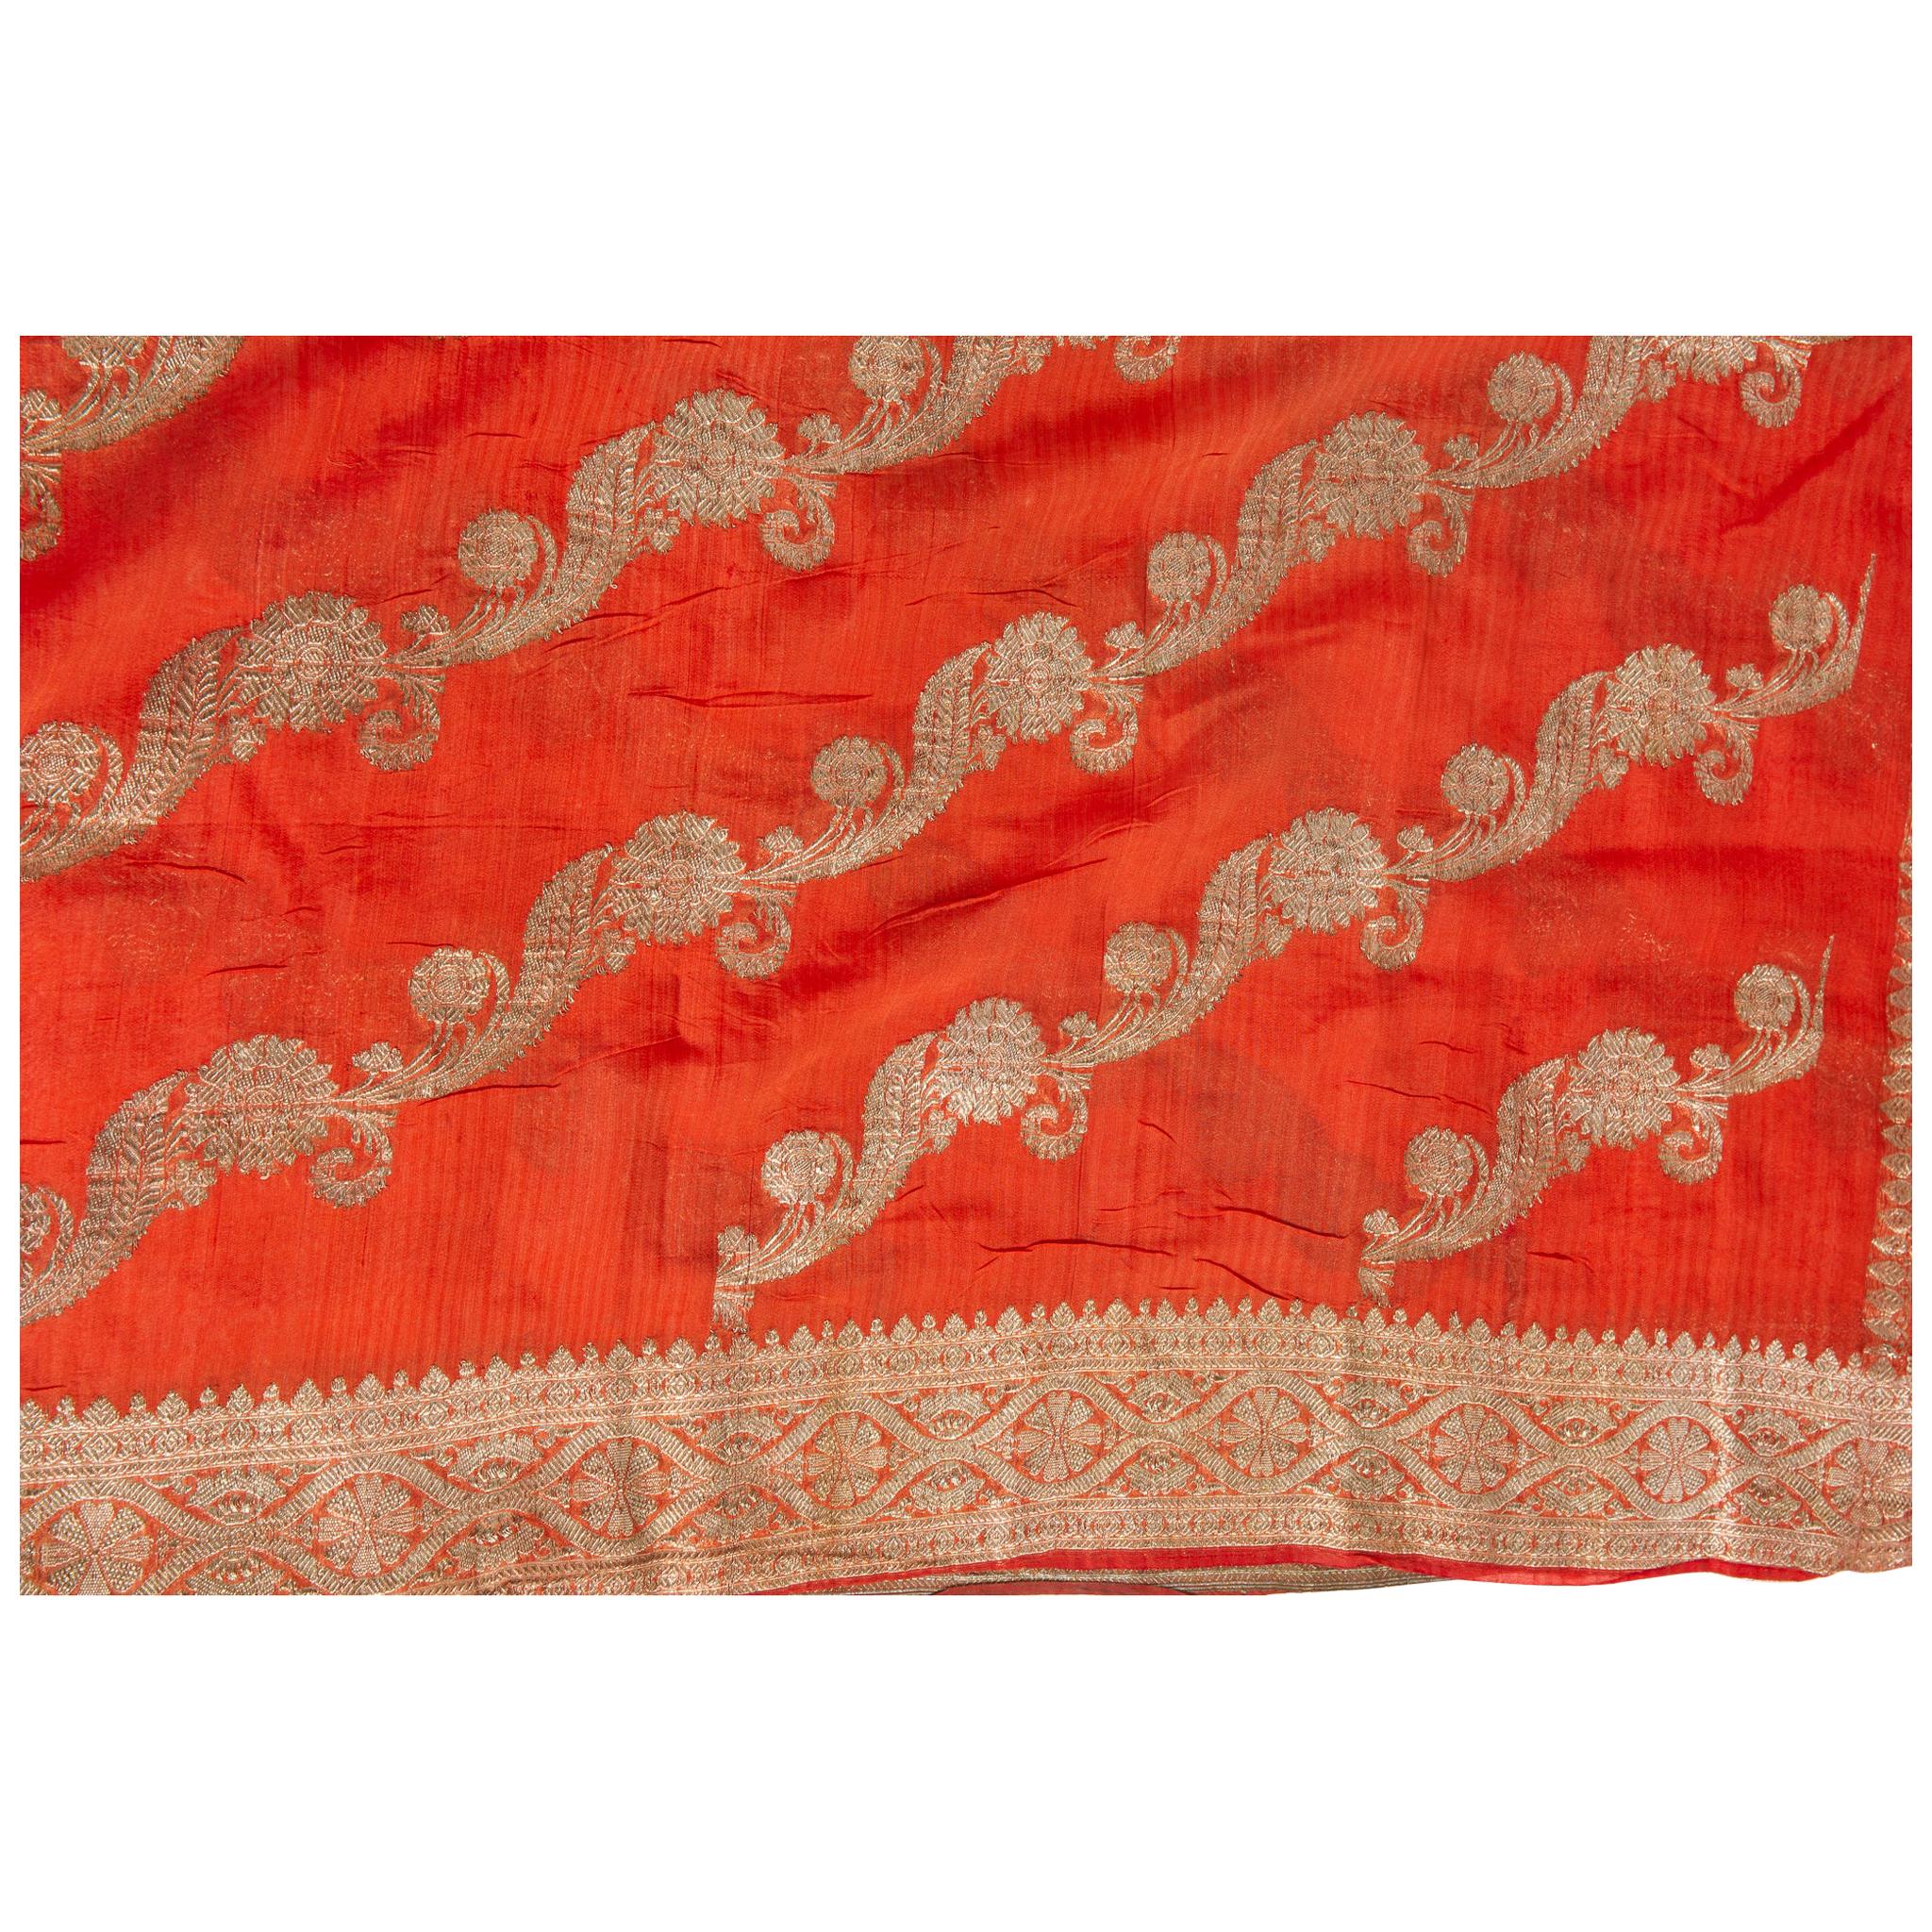  Indian Sari Coral Color New Idea for Unusual Curtains Also